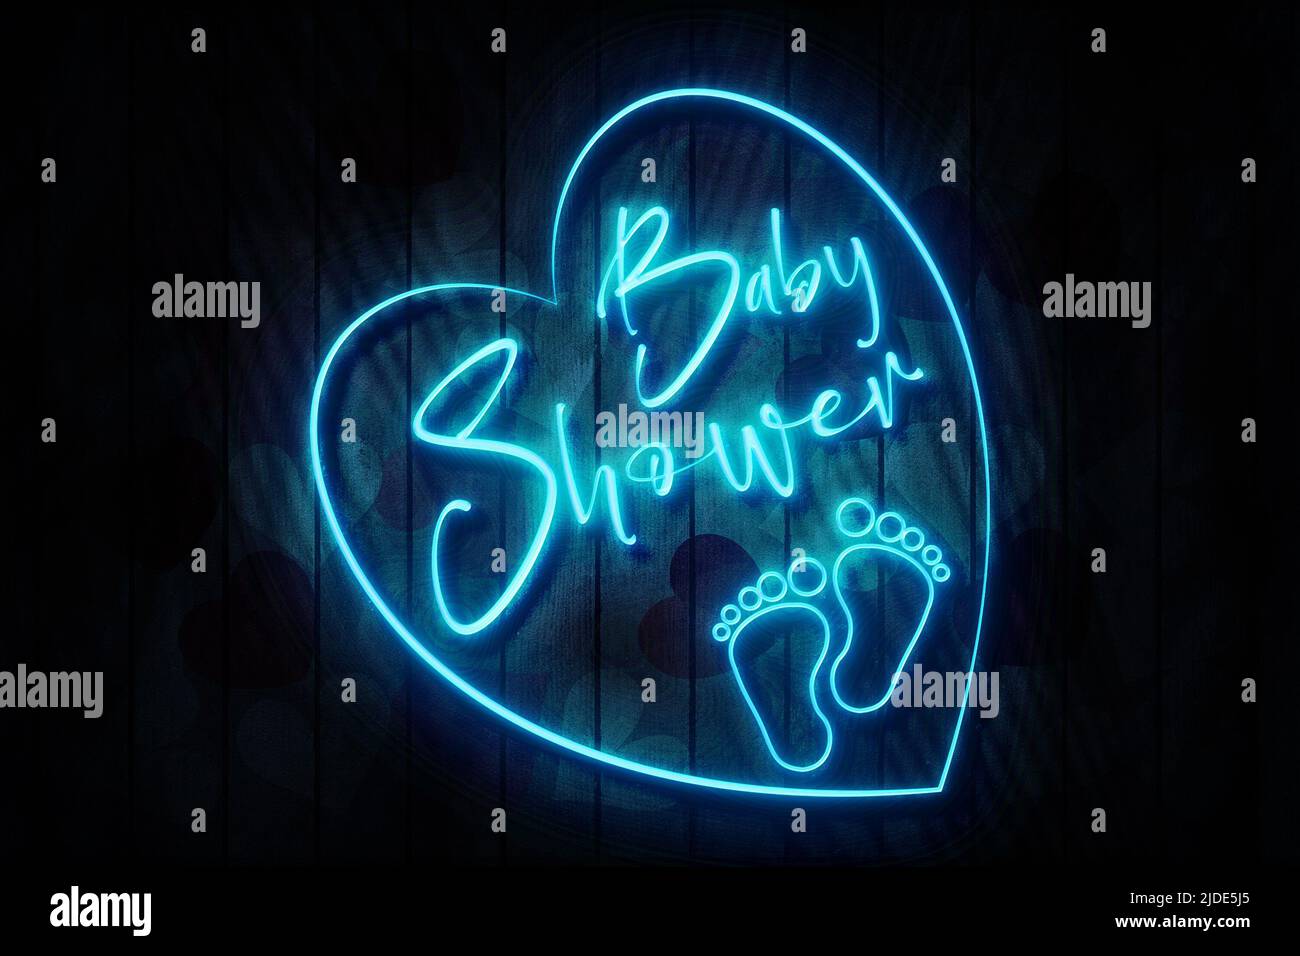 Baby Shower Blue Neon Sign on a Dark Heart decorated Wooden Wall  3D illustration Stock Photo